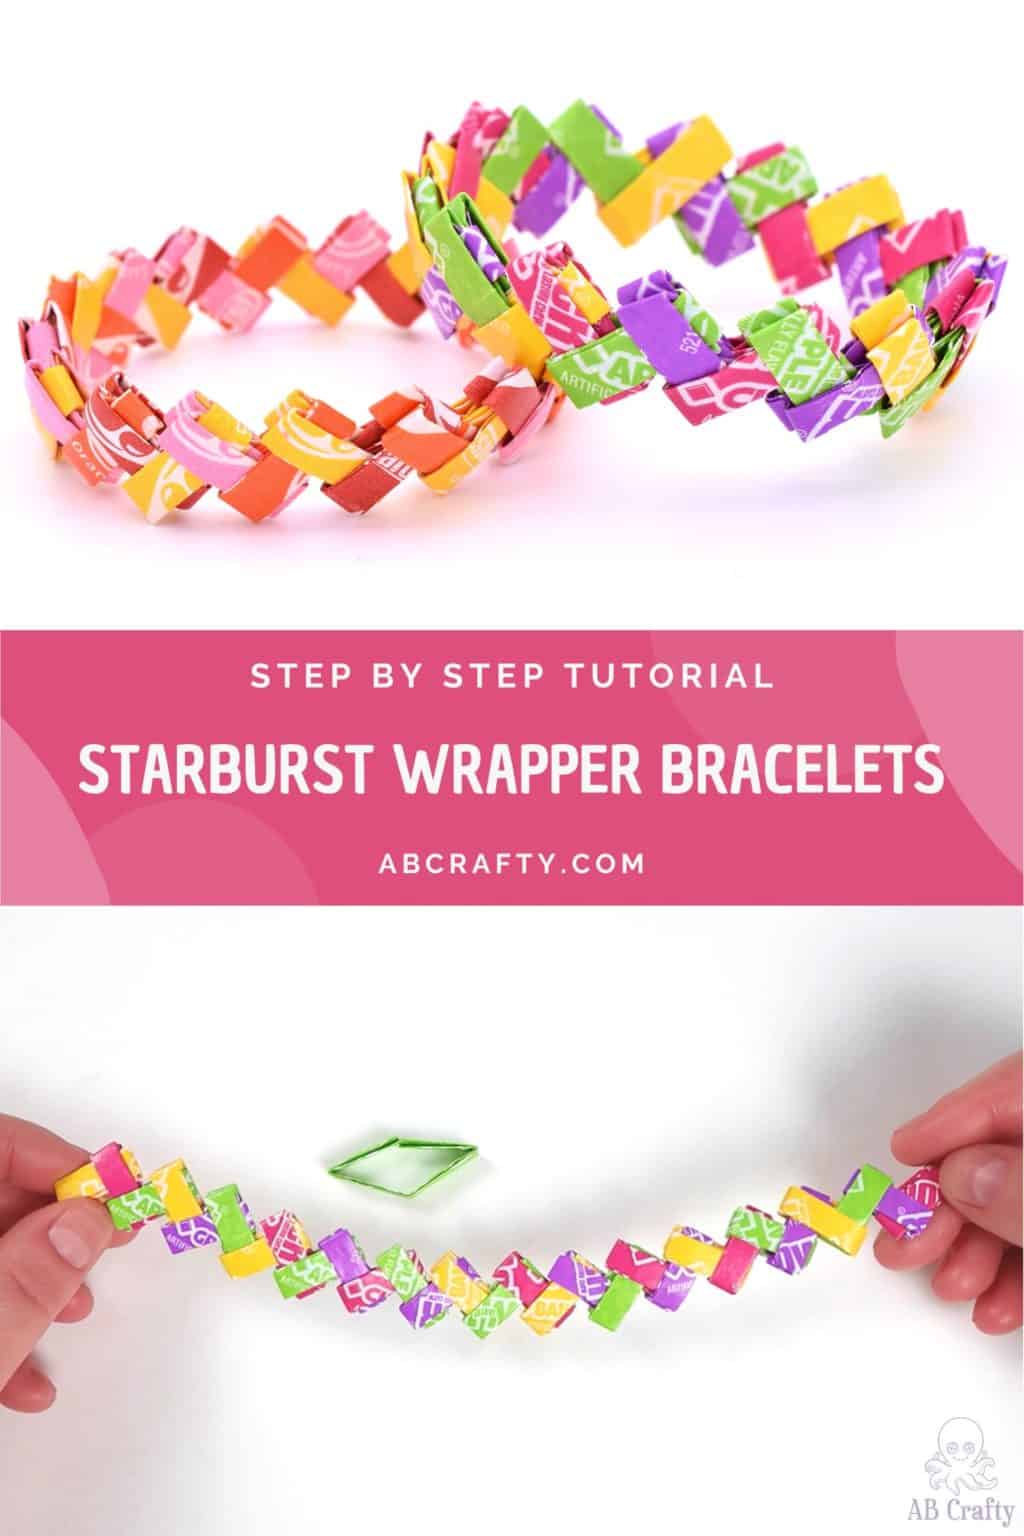 finished starburst wrapper bracelet and a candy wrapper bracelet made with now and later wrappers. bottom photo shows a gum wrapper chain made with now and later wrappers. the title reads "step by step tutorial, starburst wrapper bracelets, abcrafty.com"